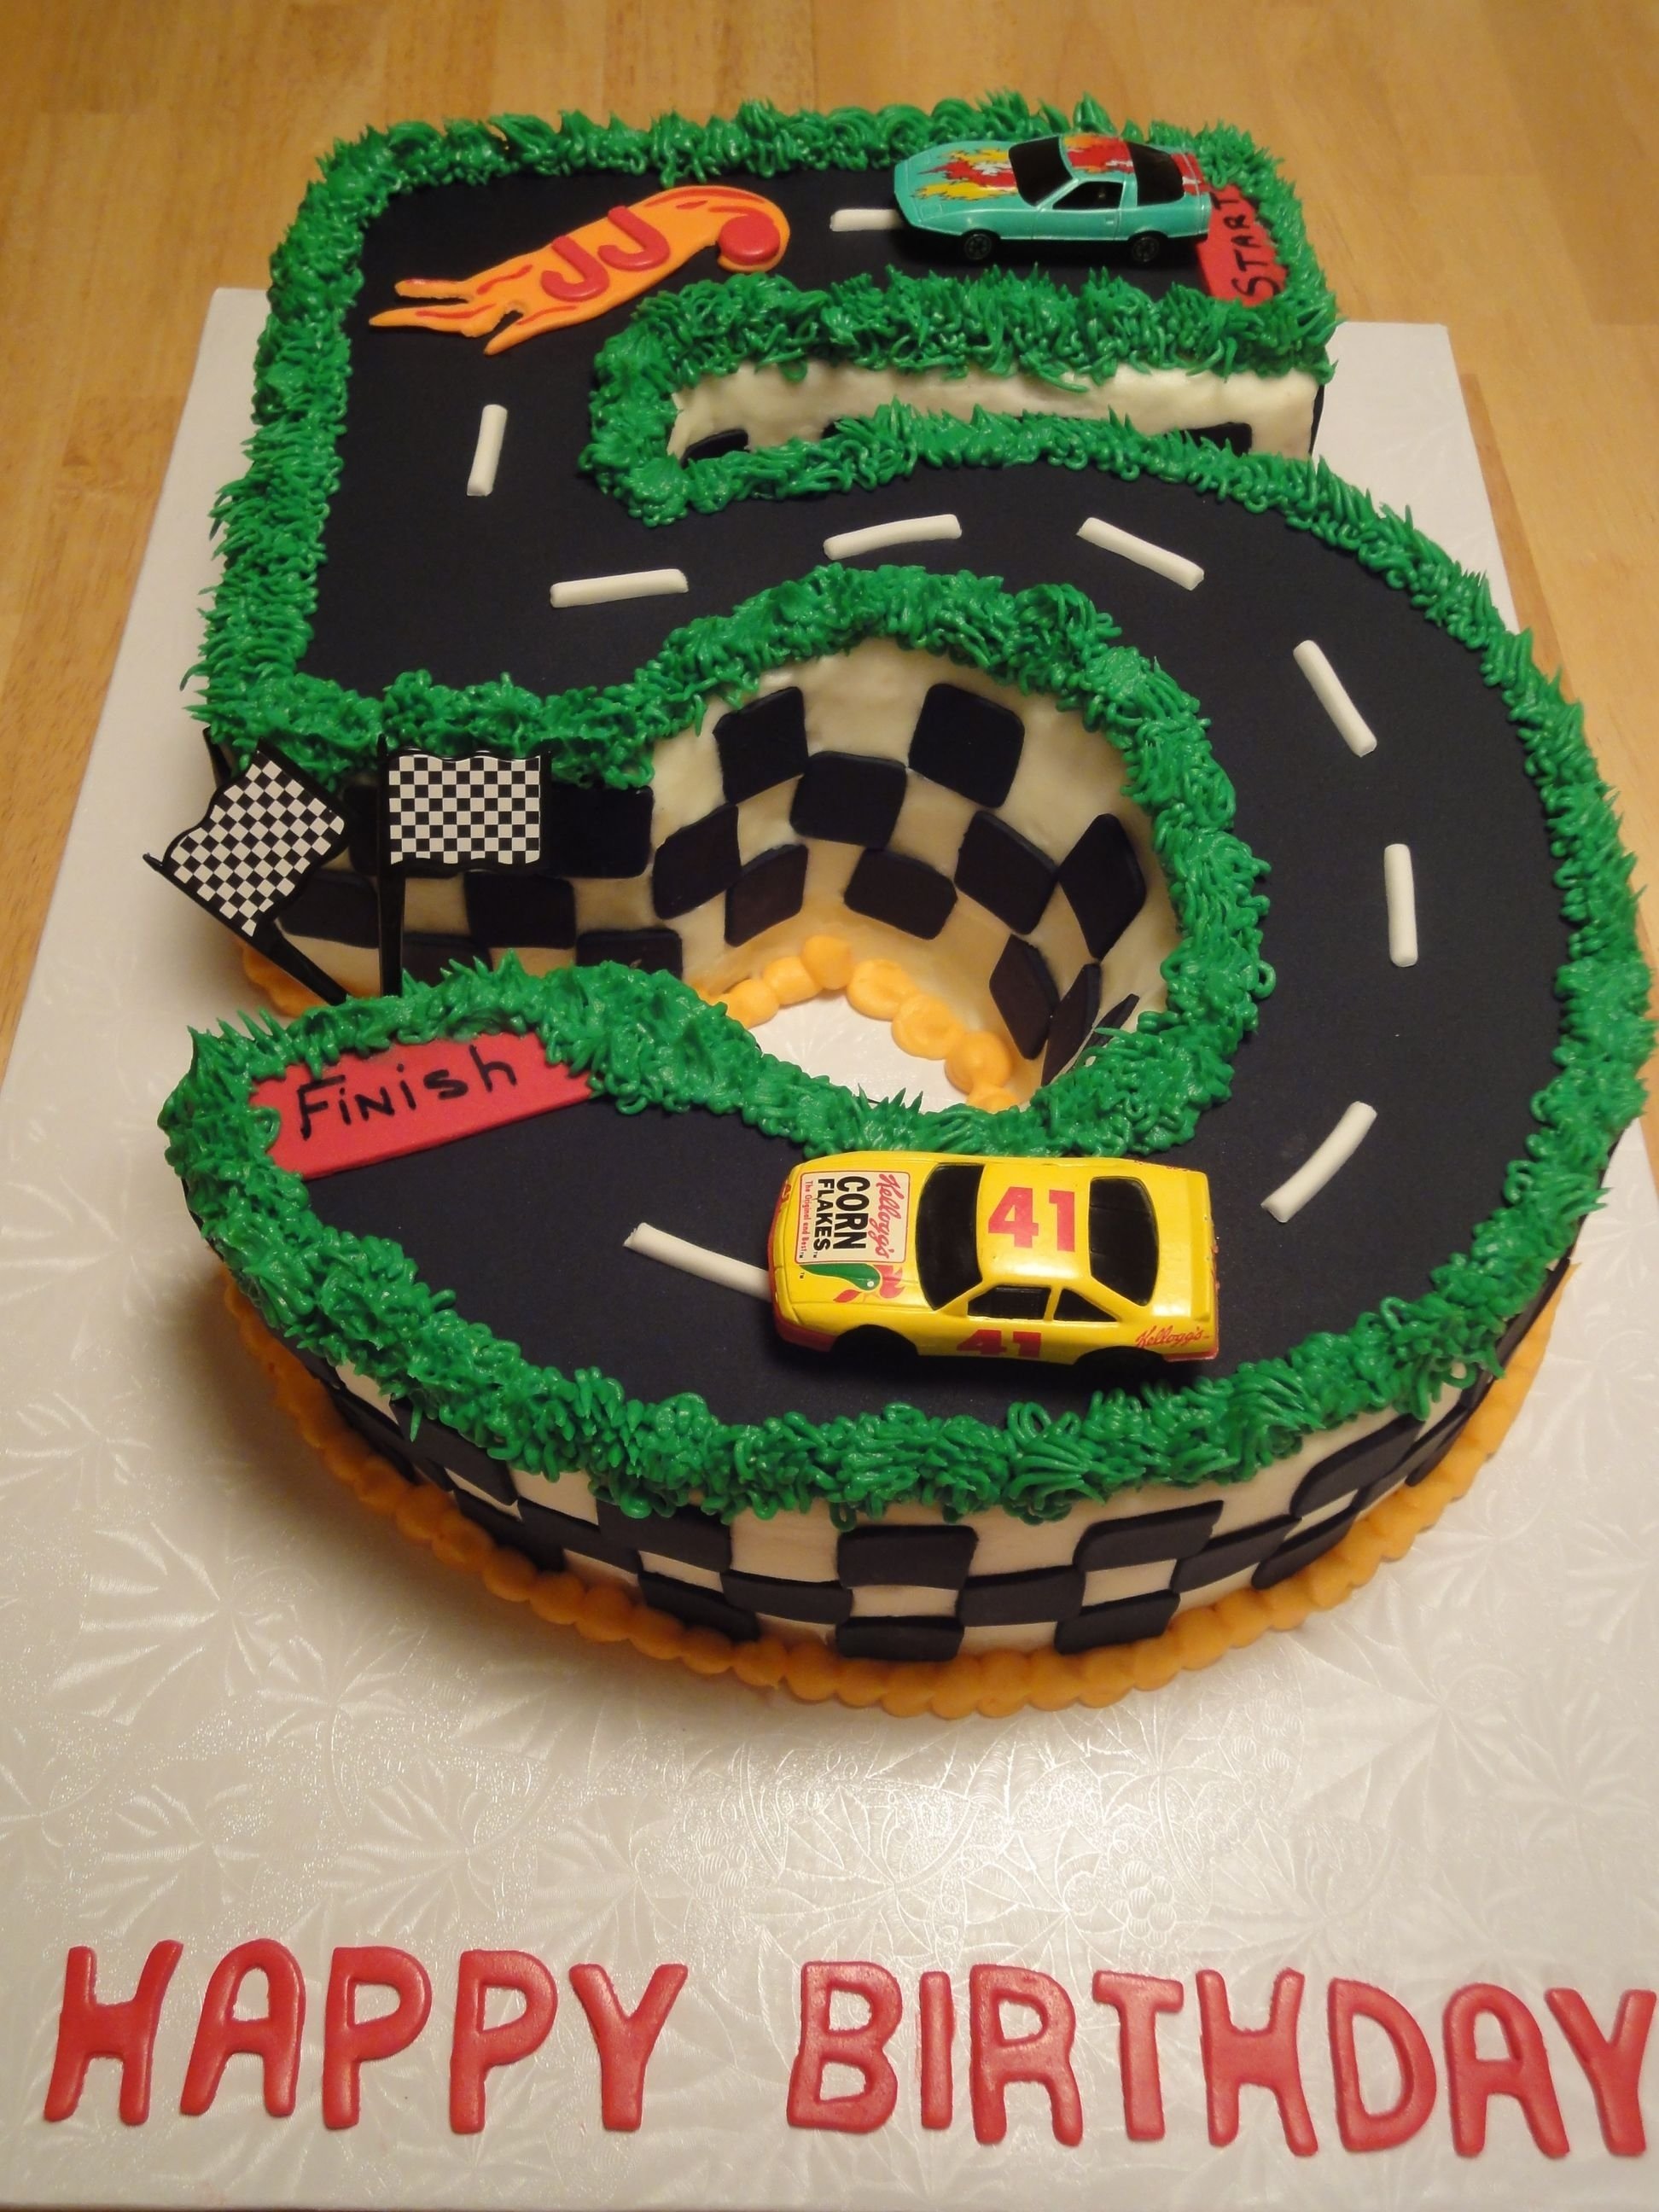 10 Awesome Birthday Ideas For A 5 Year Old Boy happy birthday to a 5 year old boy hot wheels cake janies sweet 2022